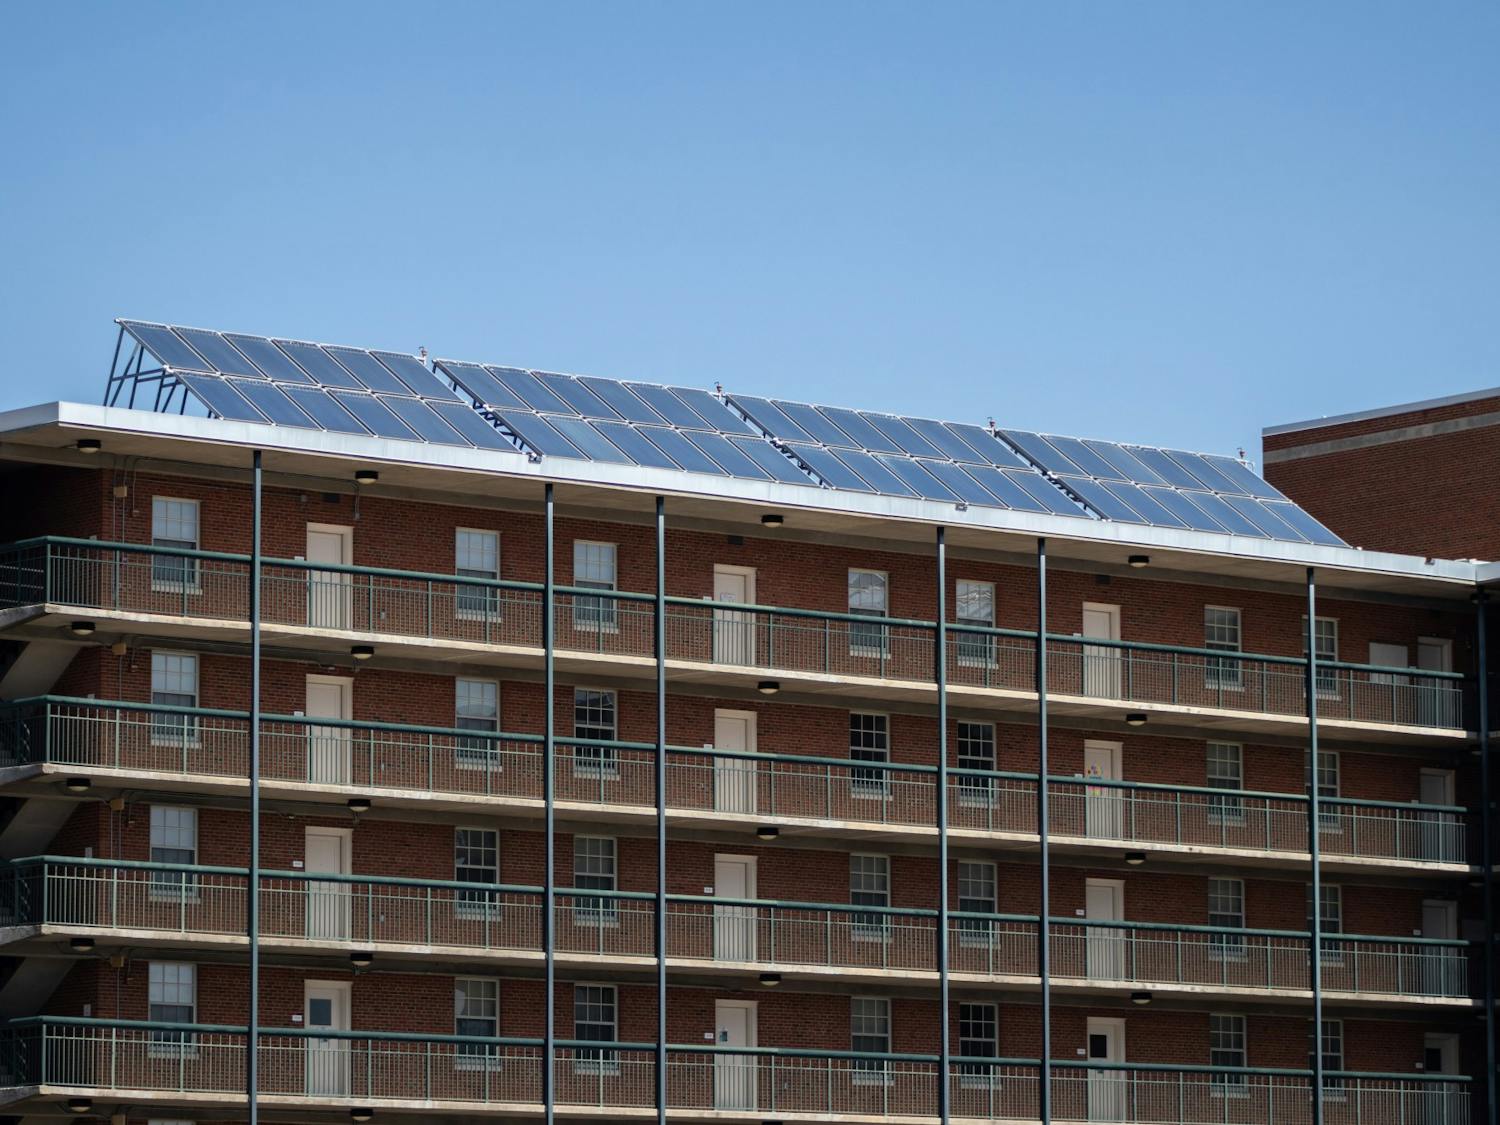 Solar panels on the top of Morrison Residence Hall in Chapel Hill, NC, as photographed on Sunday, March 27th. In North Carolina, there are over 19,000 installed solar energy systems.